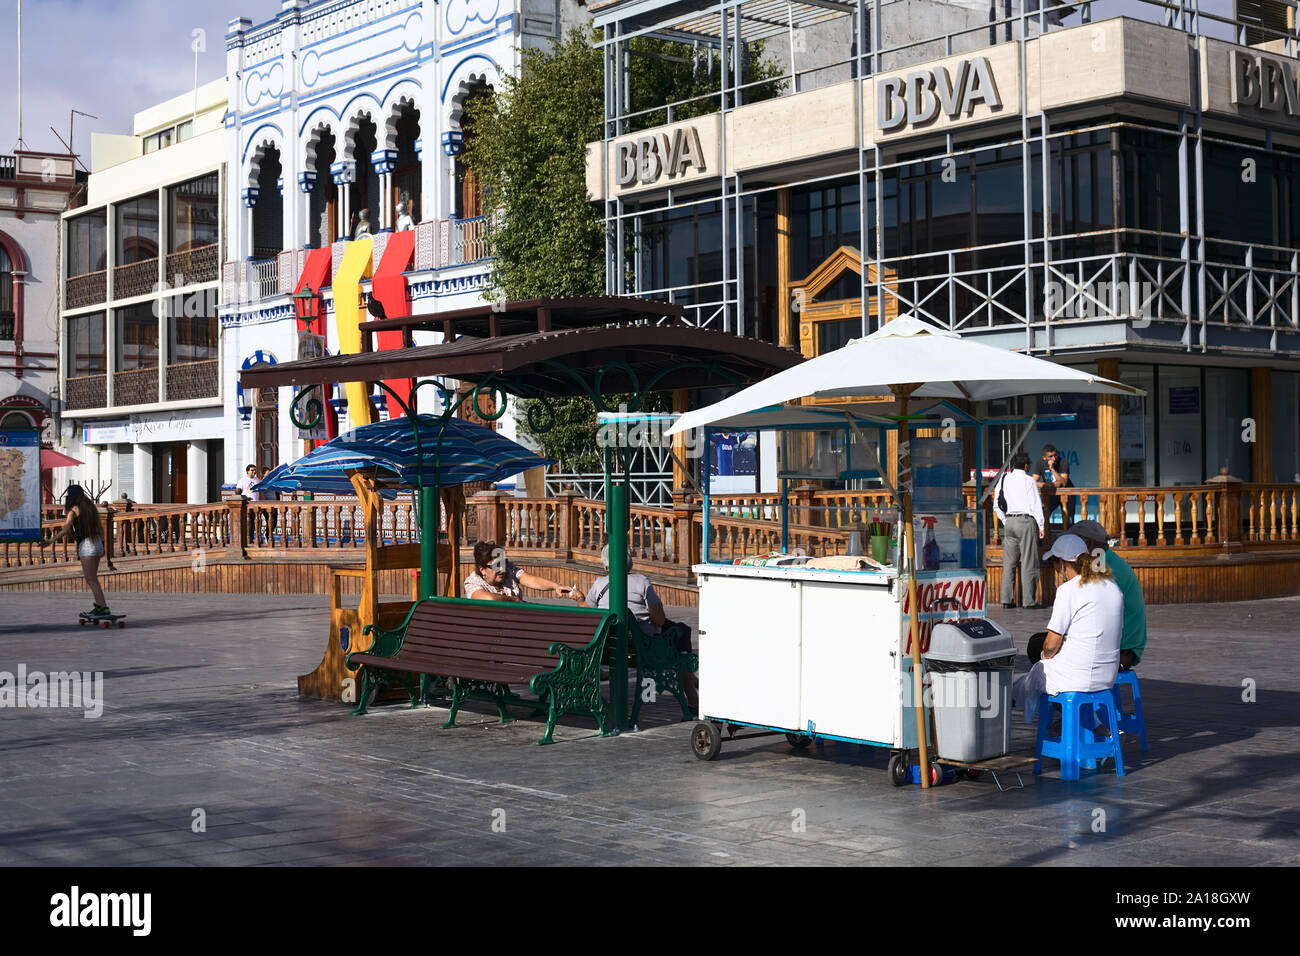 IQUIQUE, CHILE - JANUARY 22, 2015: Unidentified people sitting at Mote con Huesillo (Chilean cold drink) stand on Plaza Prat main square in Iquique Stock Photo